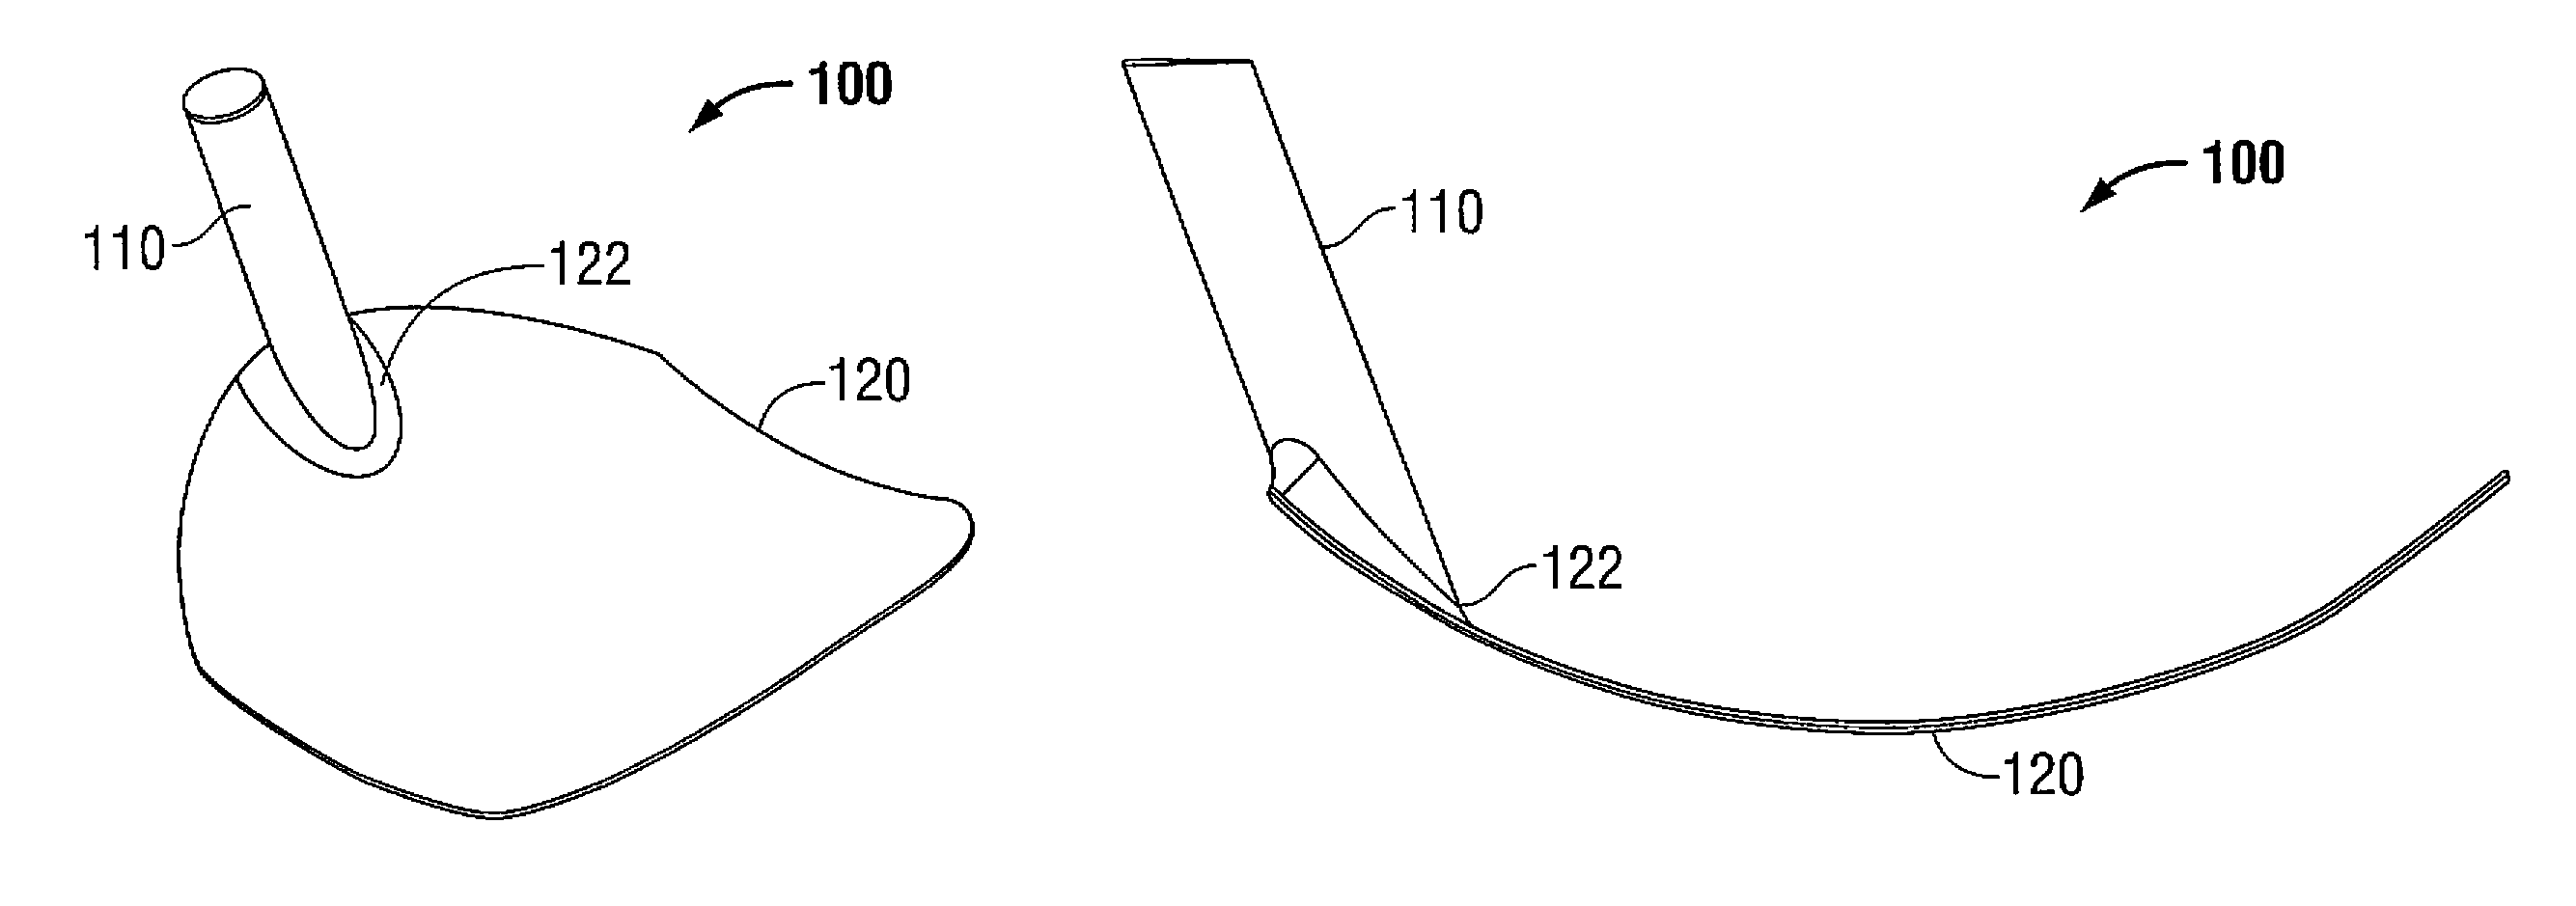 Patient support device and method for use